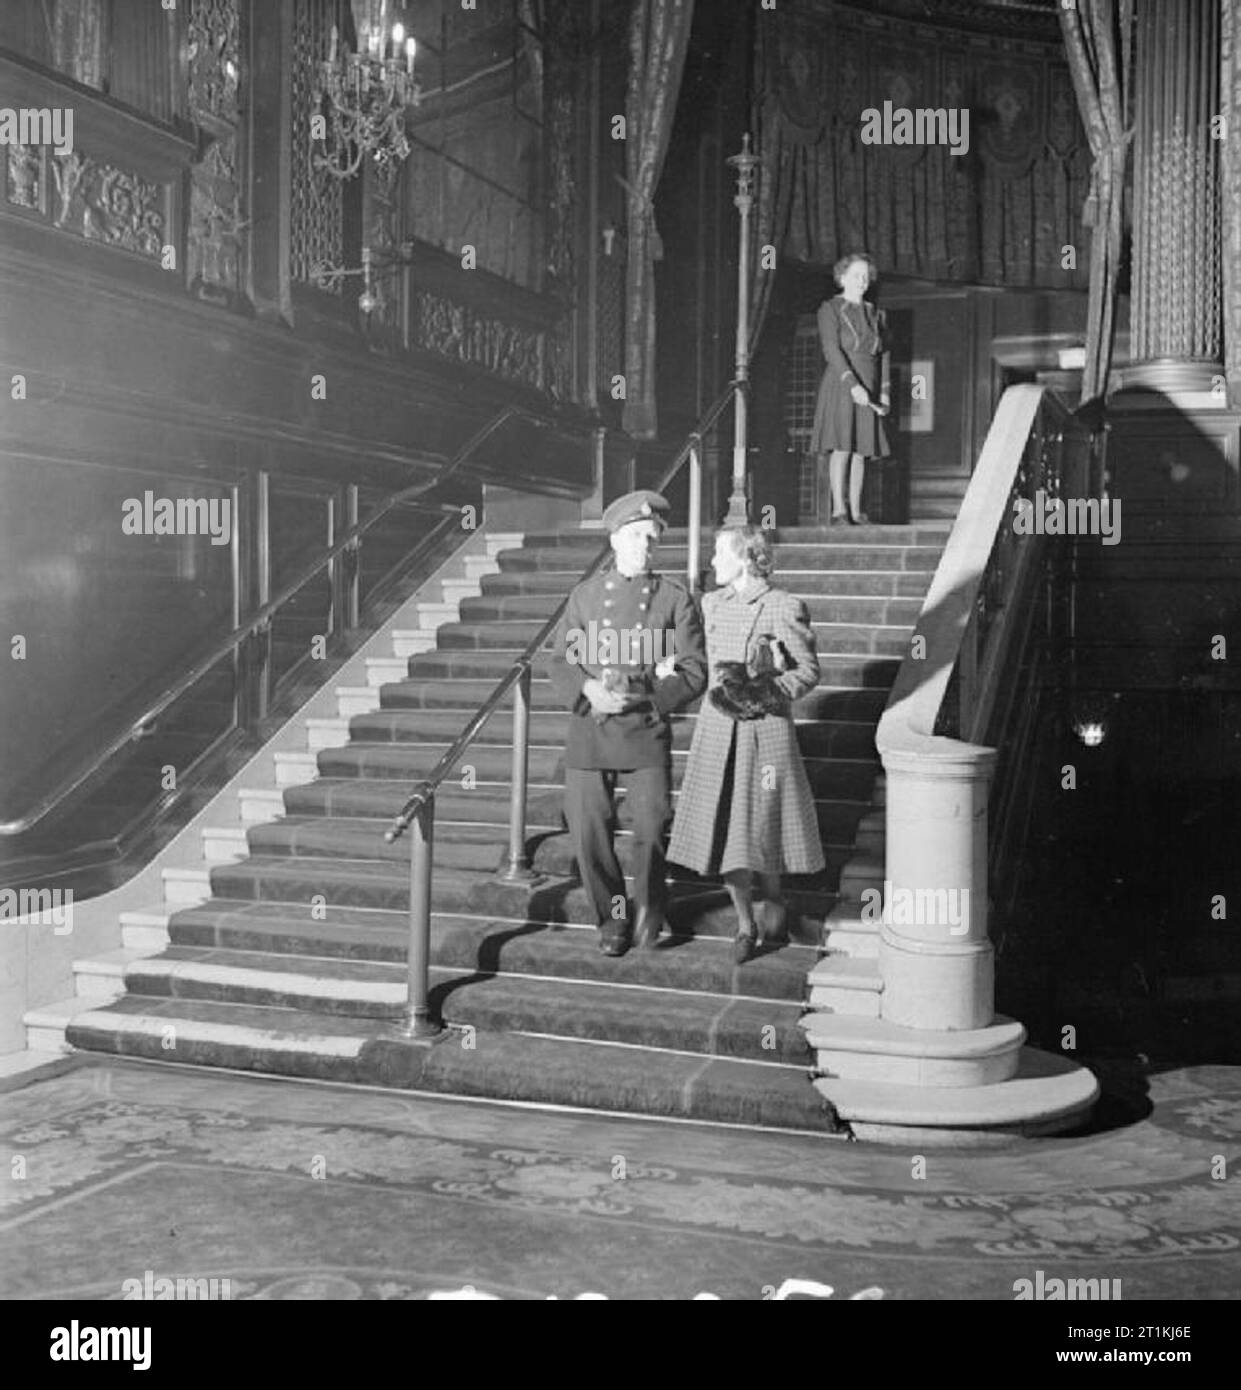 Cinemas and Cinema-going during the Second World War National Fire Service fireman Sydney Chillingworth and his wife Hilda descend the staircase of a cinema, after having seen a film, somewhere in London. An usherette can be seen standing at the top of the stairs. Stock Photo